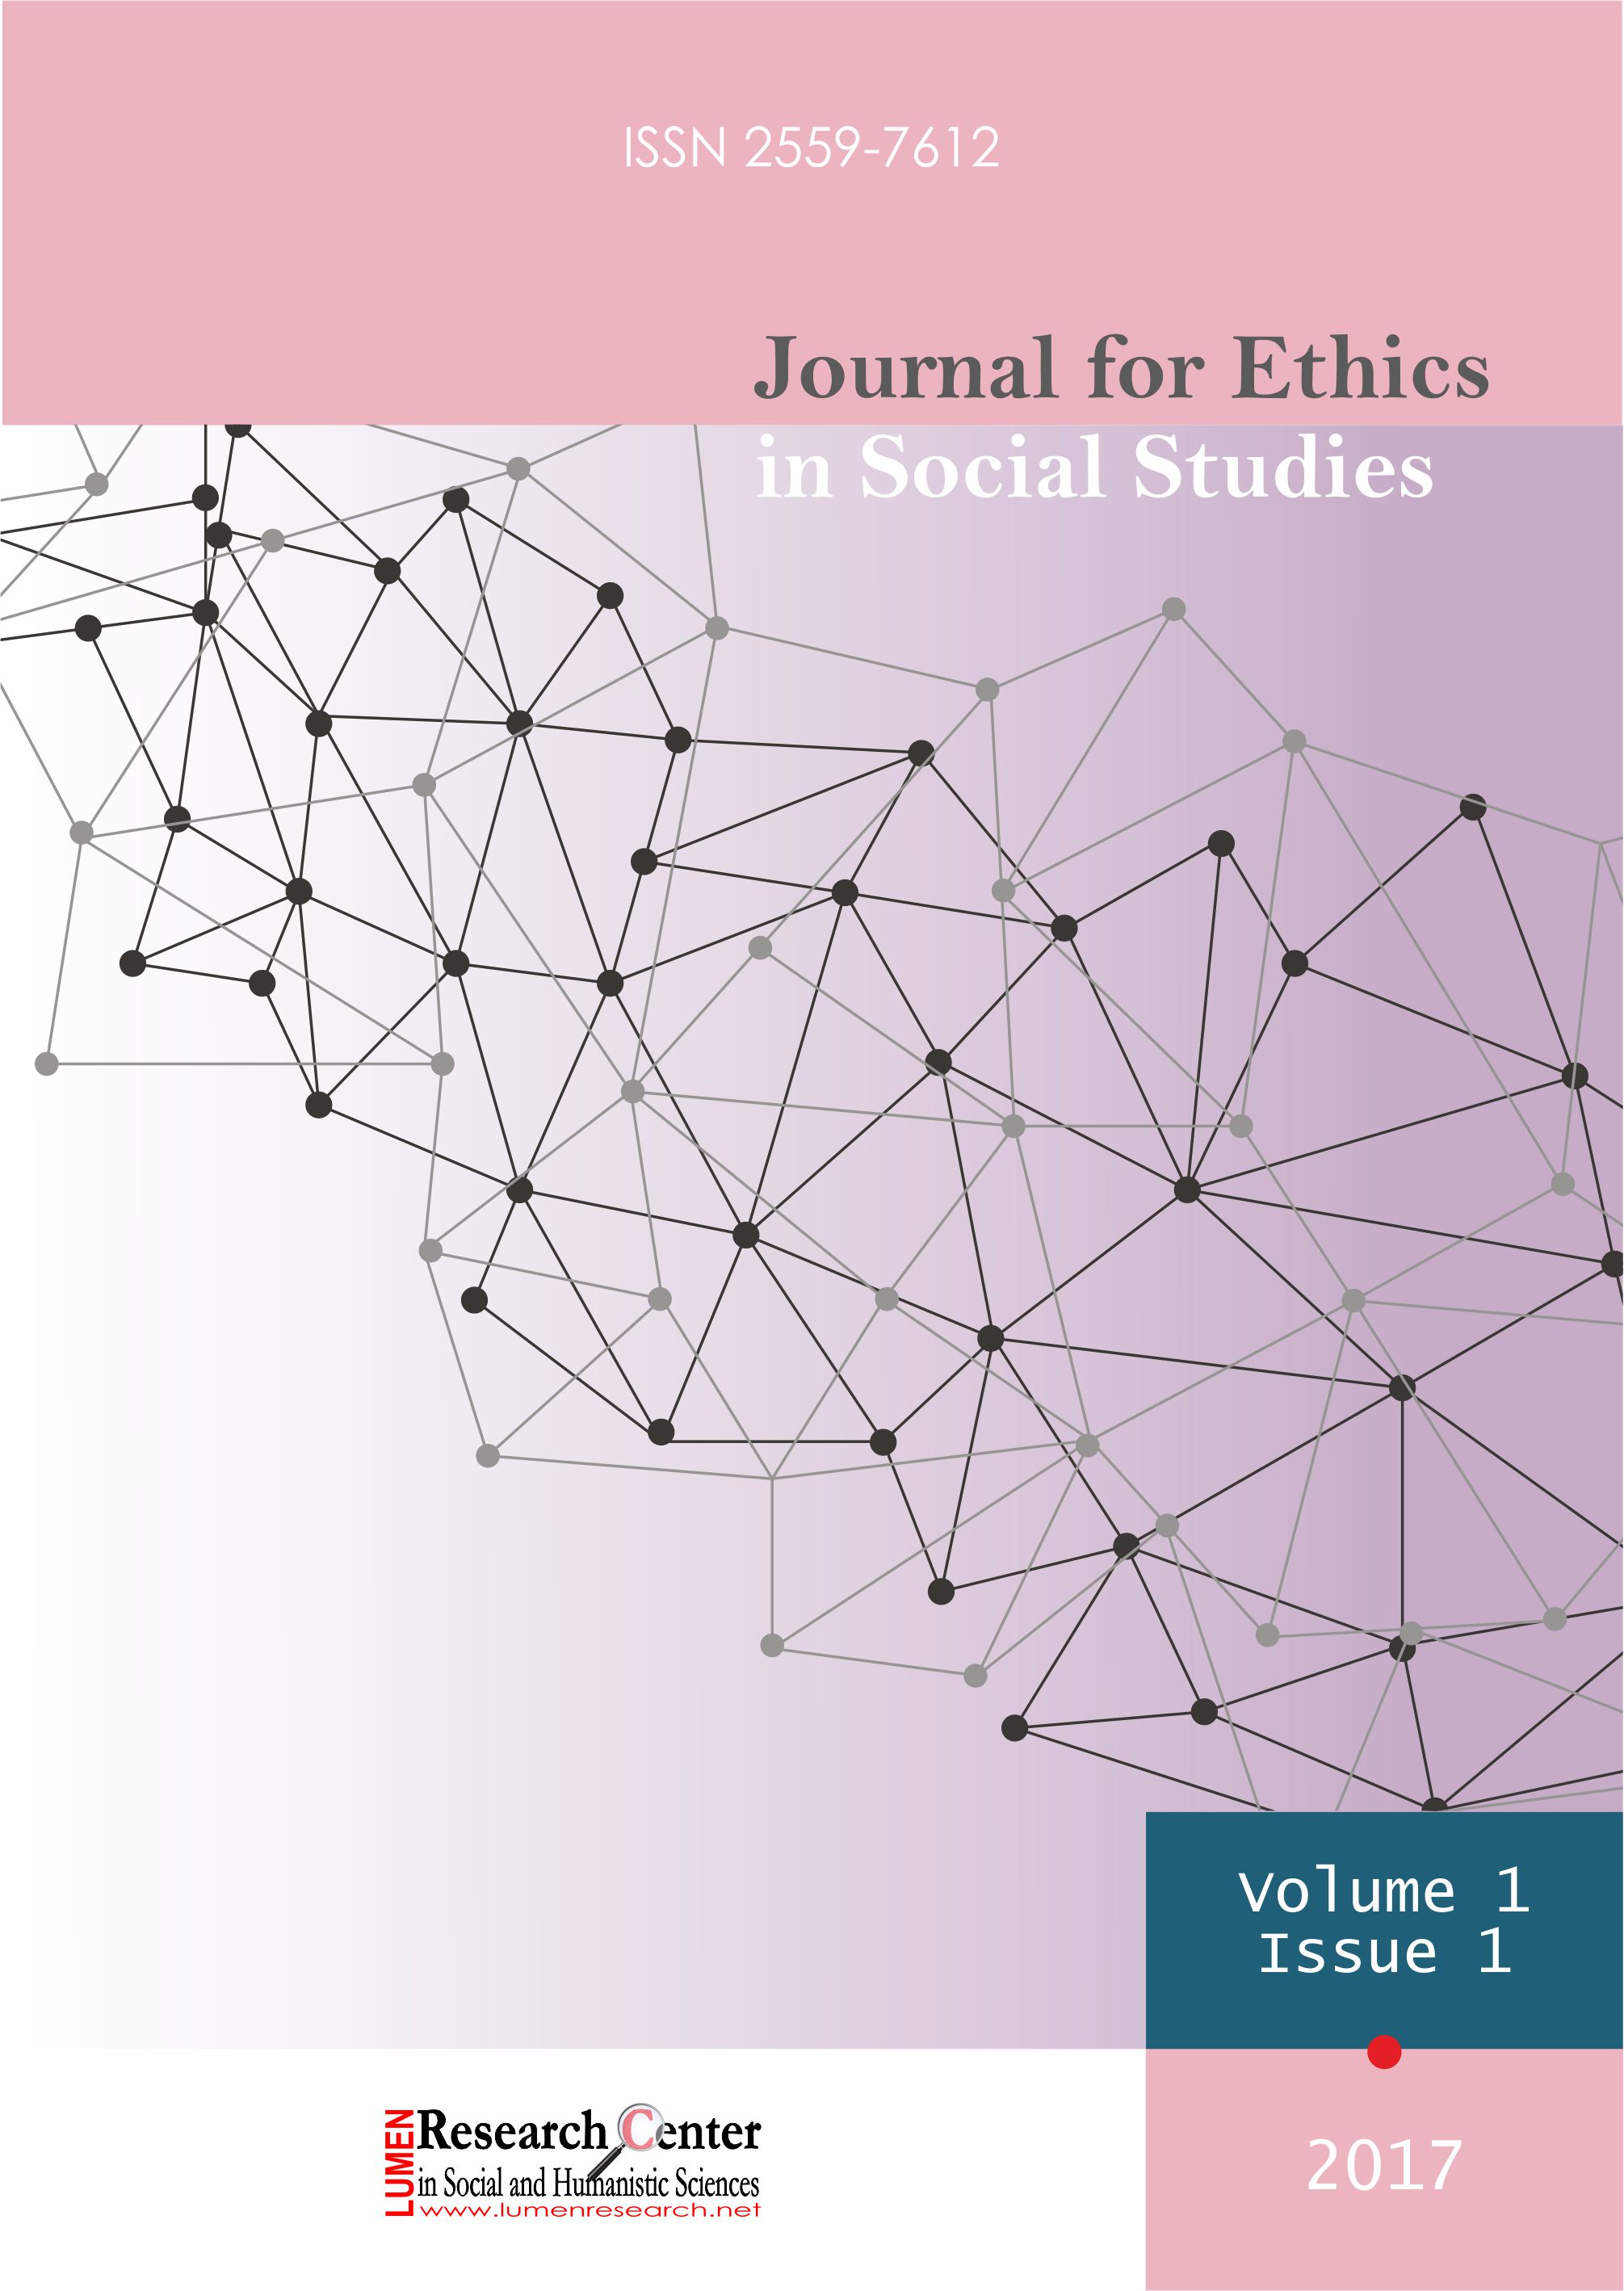 The Role of Supreme Audit Institutions in Promoting and Strengthening Ethics and Integrity in the Public Sector. Possible Models and Tools to Follow Cover Image